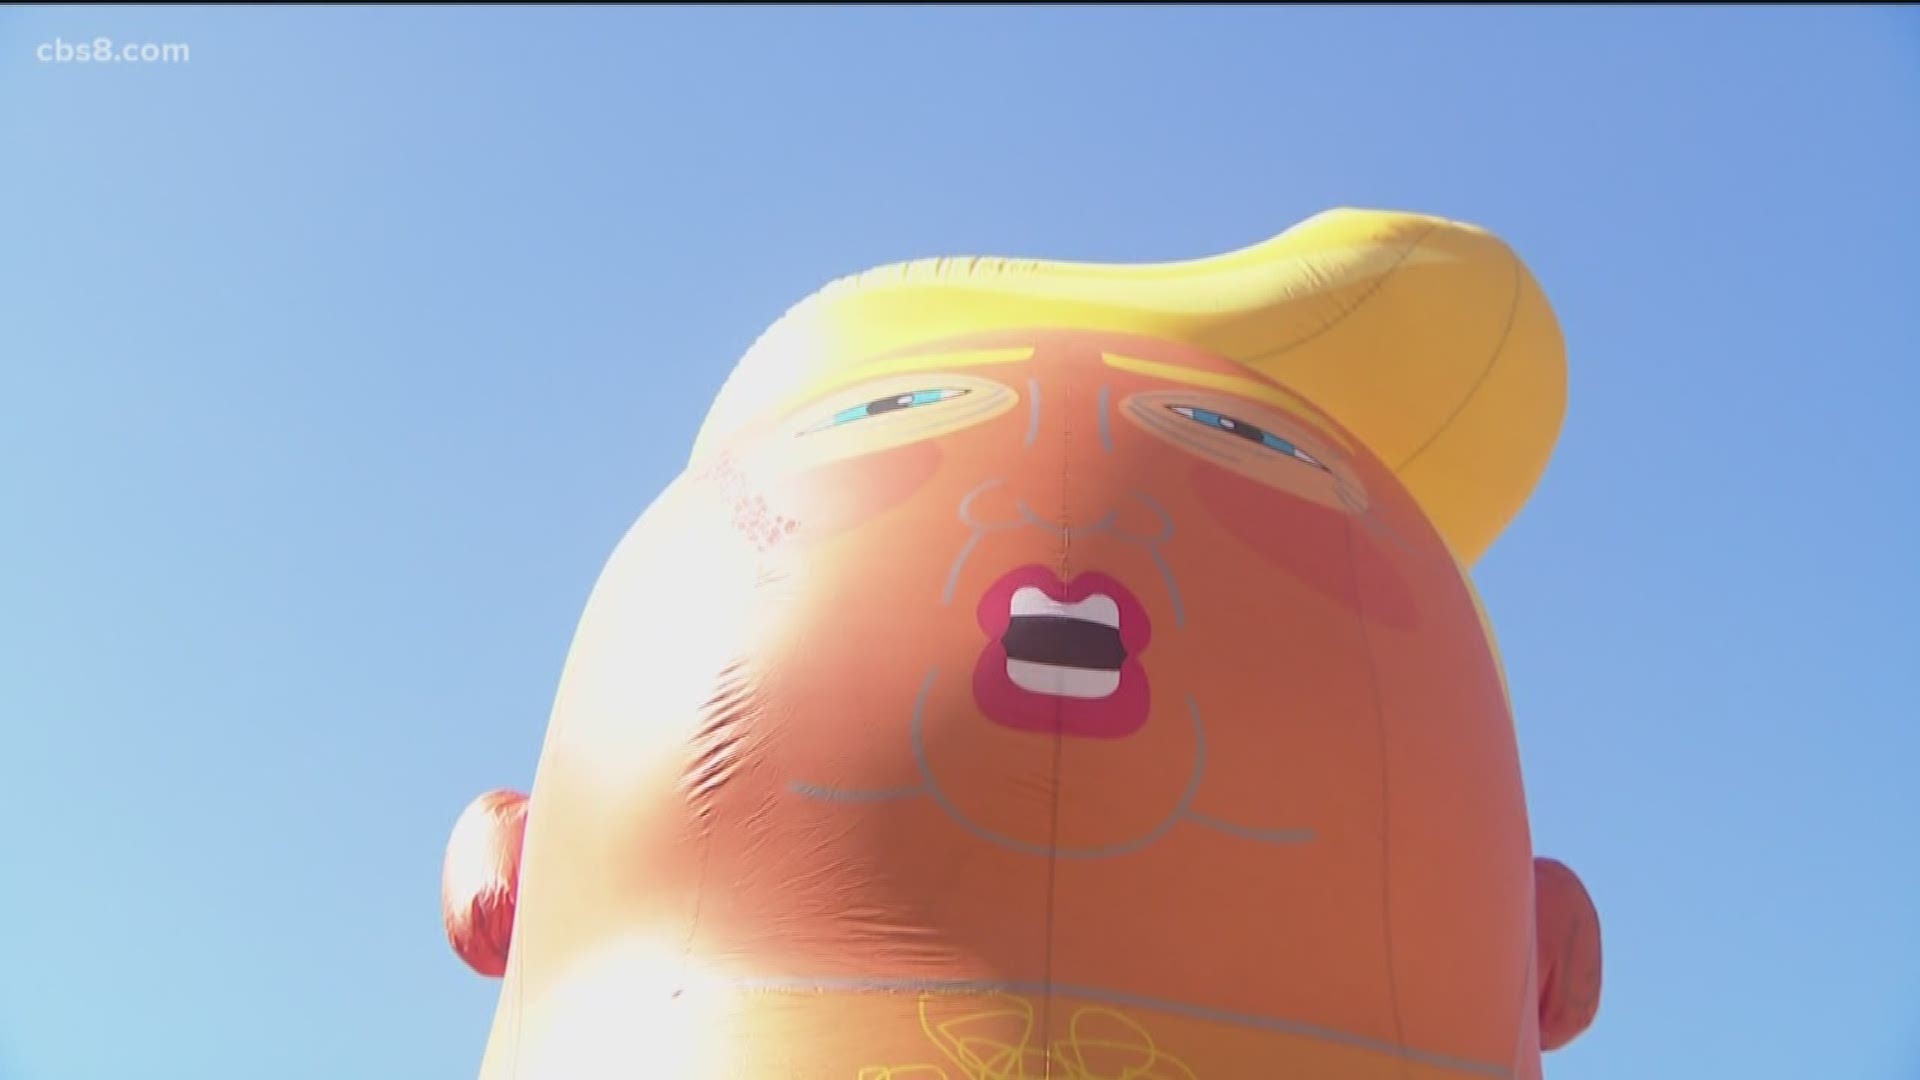 The Backbone Campaign says they use inflatables, freeway bannering and light projection for “artful activism” throughout the country.